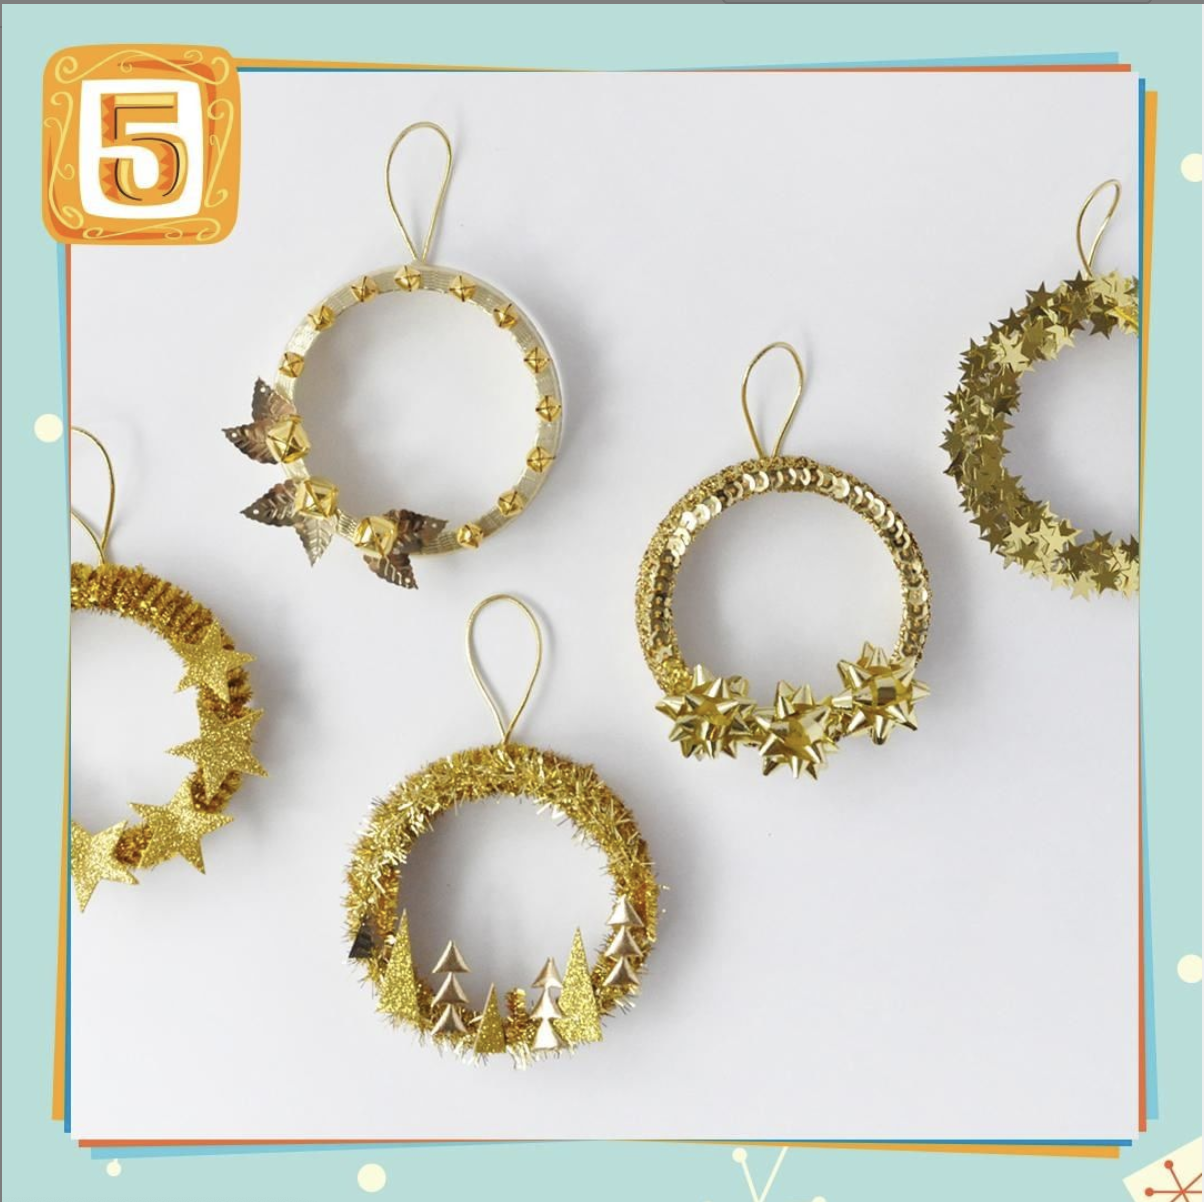 🎵On the 5th day of Christmas 🎵…@handmadecharlotte made #DIY golden rings for the #ChristmasPriceIndex. Five golden rings cost $750 this year, but why not bling out your tree with these ornaments?